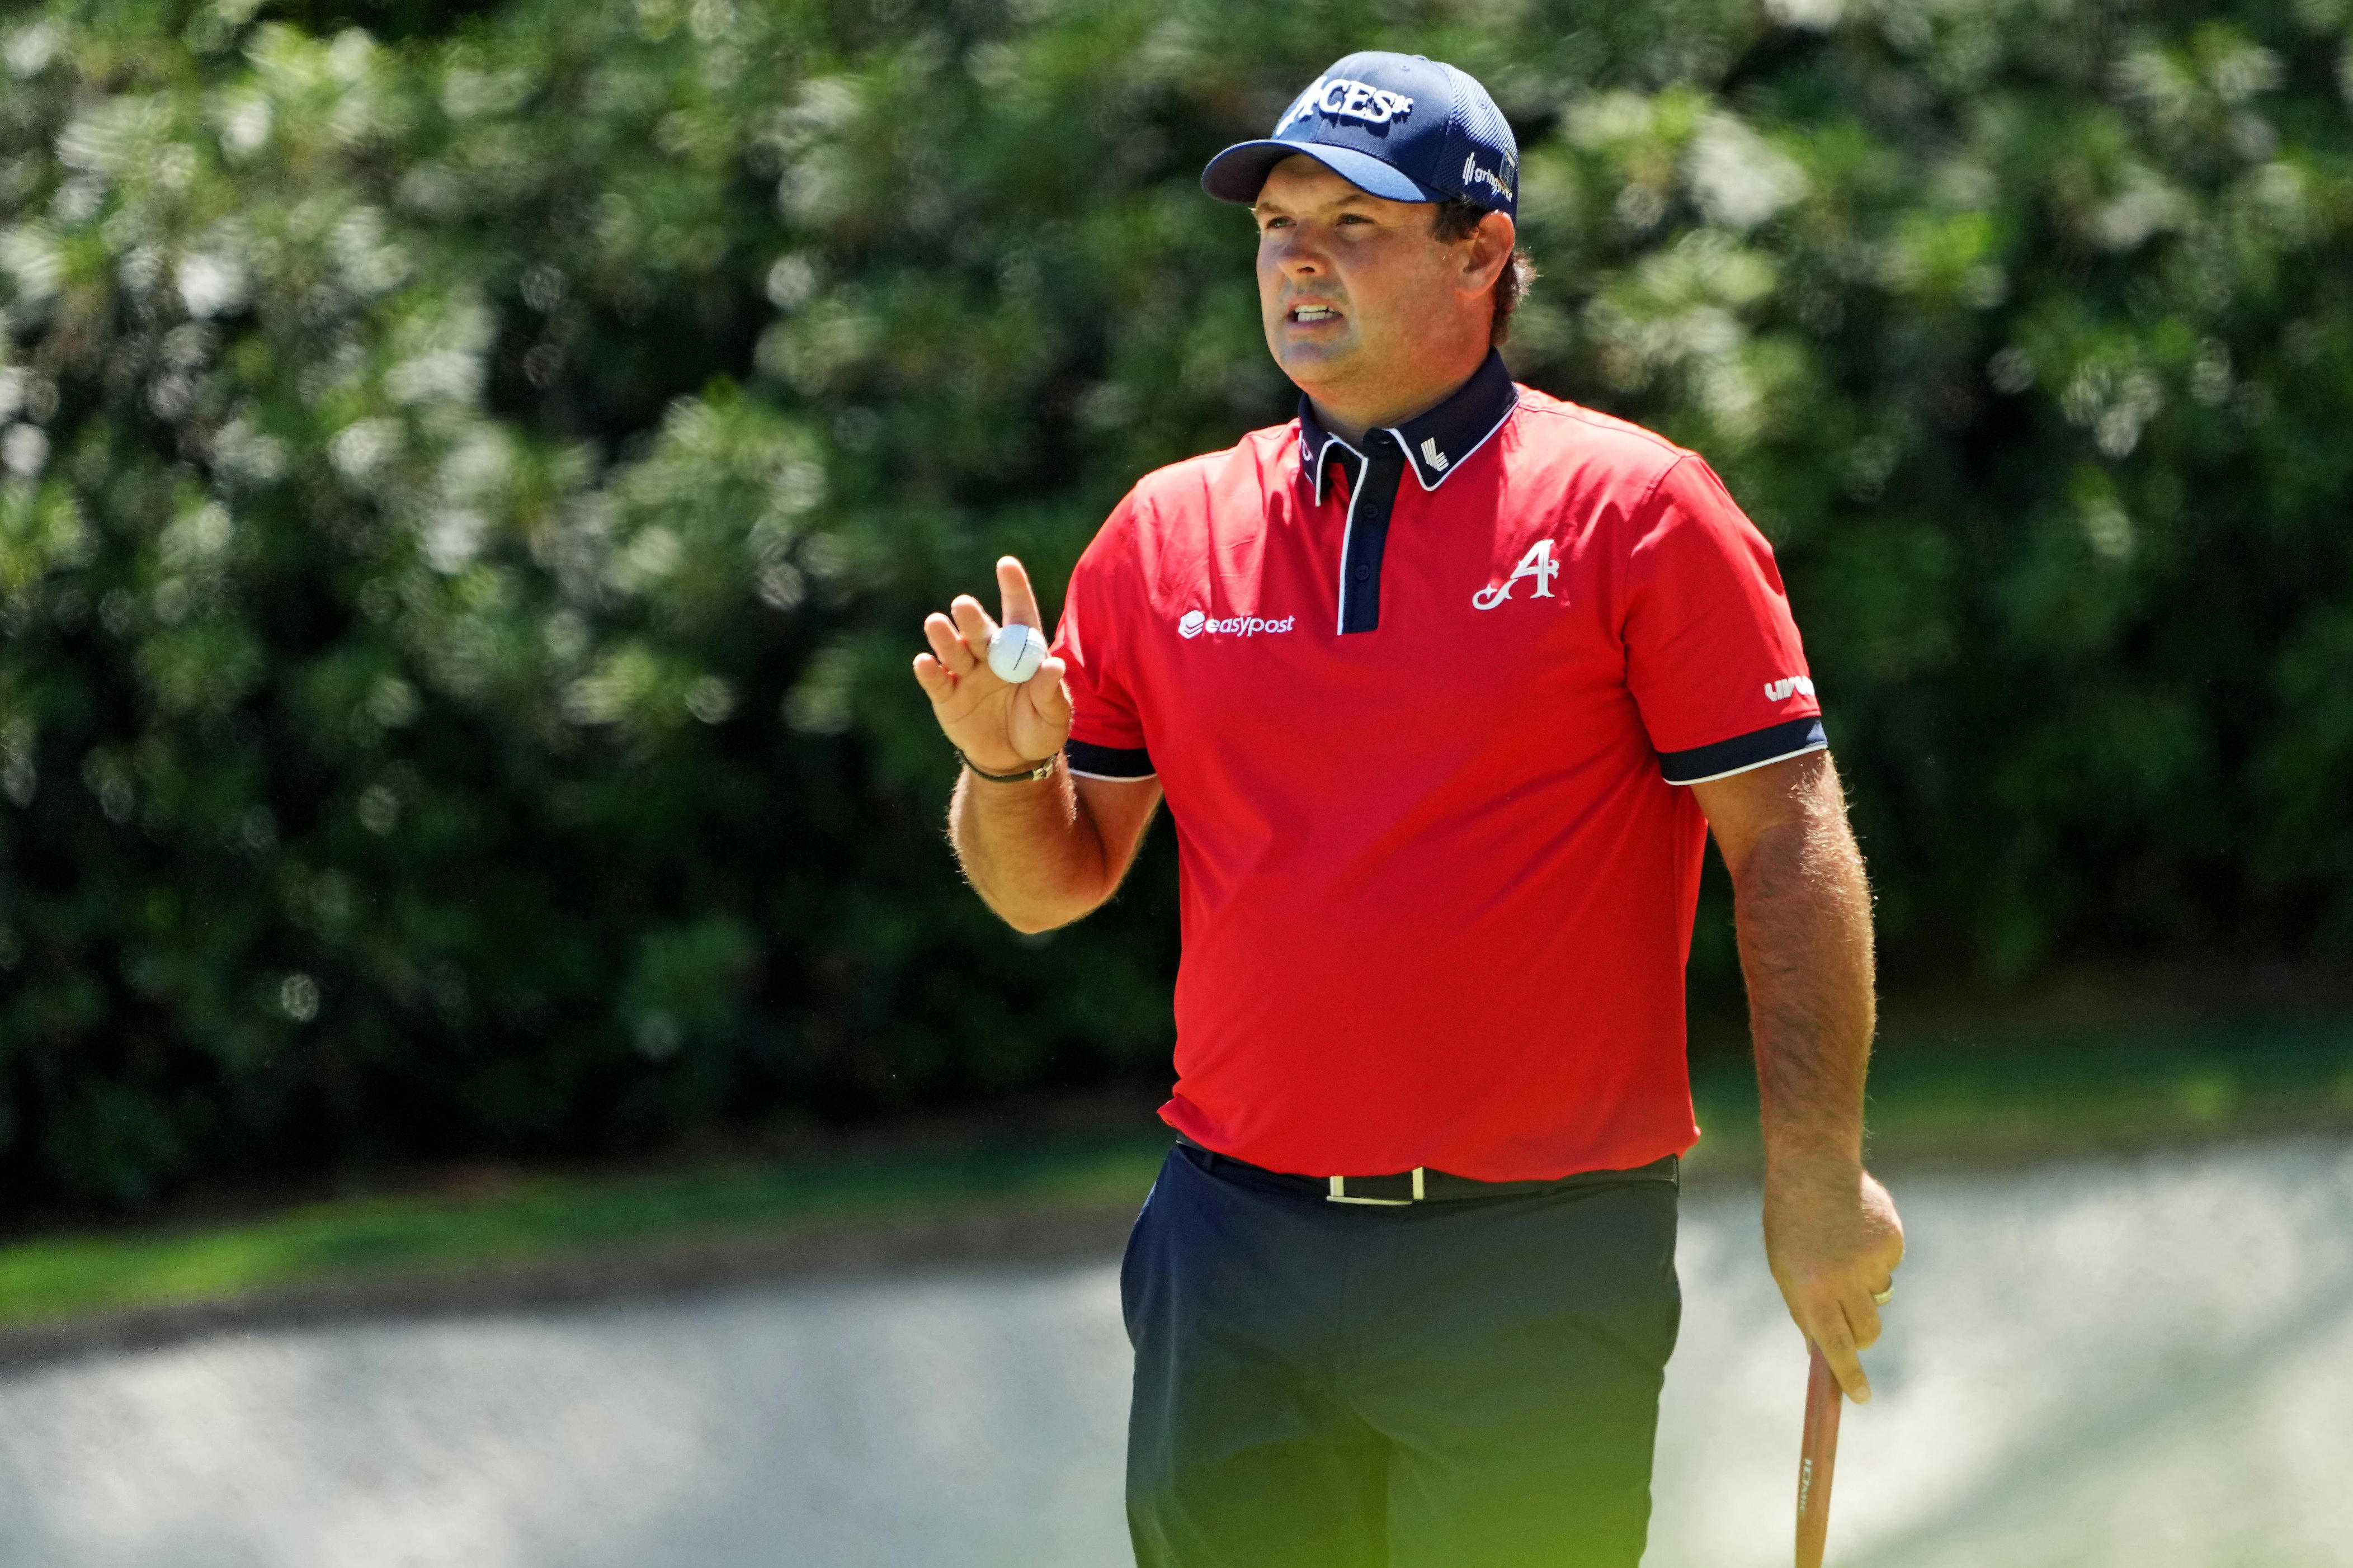 lynch: where have you gone patrick reed? a nation turns its lonely eyes to you!